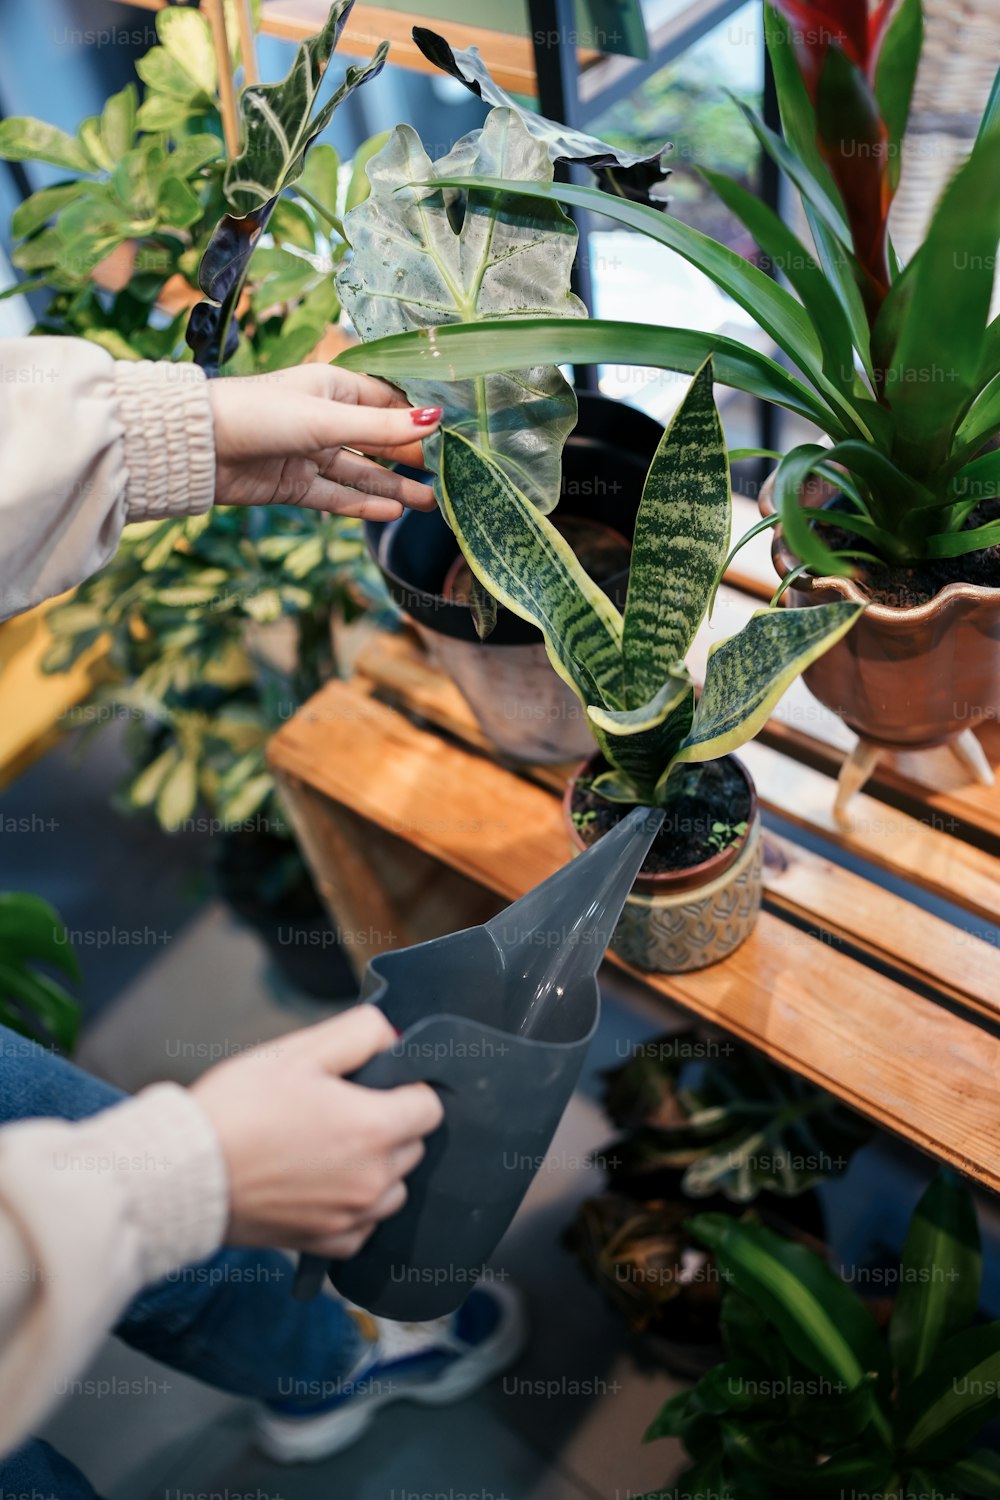 a person holding a pair of scissors near a potted plant